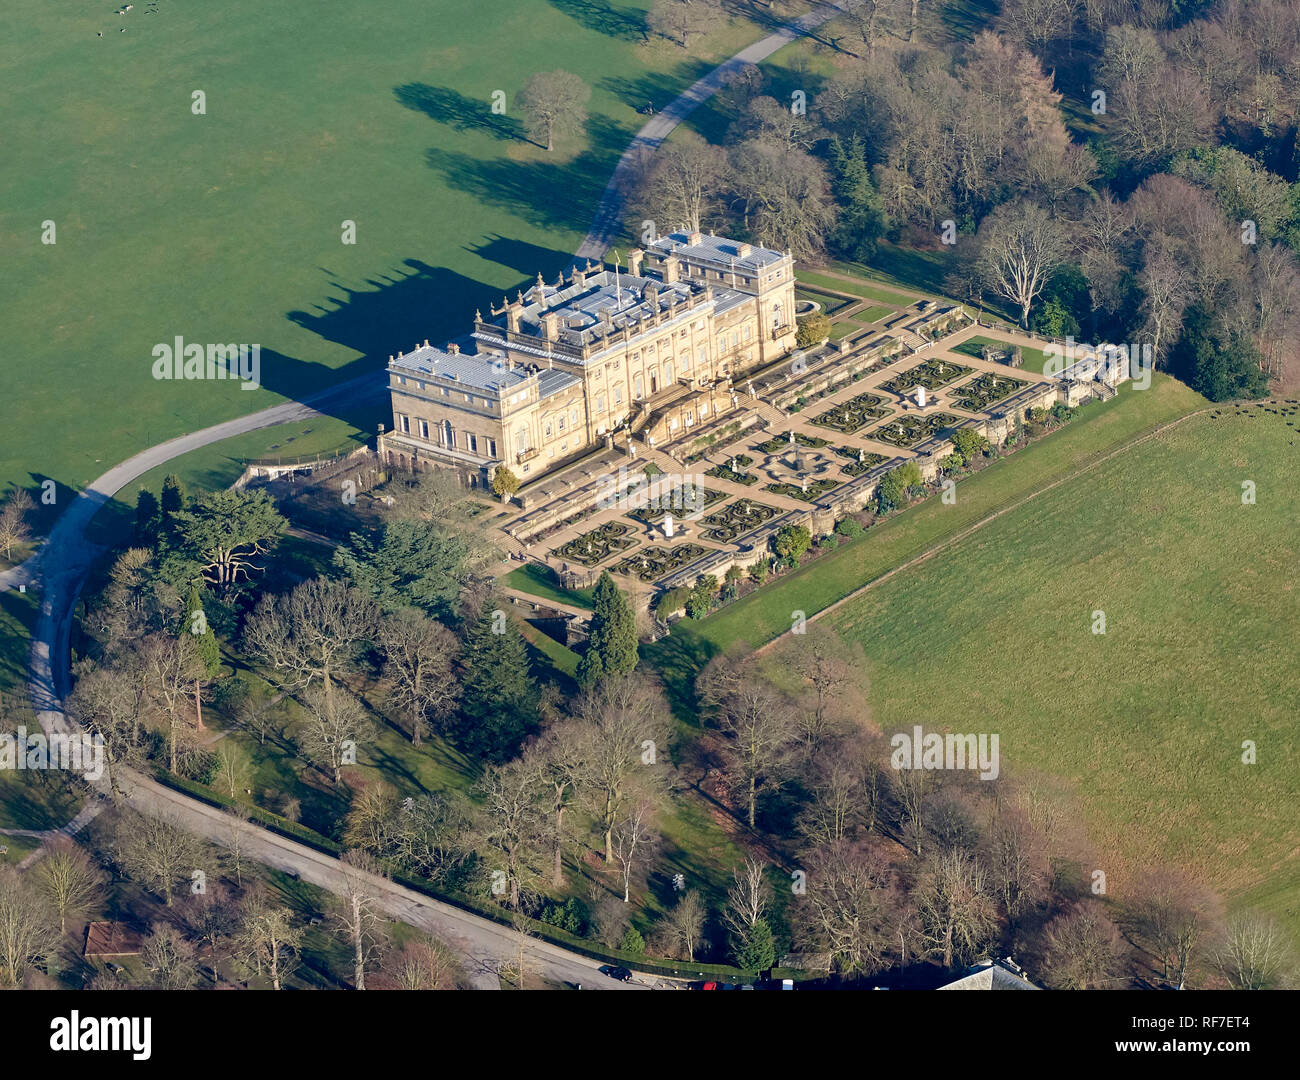 An aerial view of Harewood House, Between Harrogate and Leeds, West Yorkshire, Northern England, UK Stock Photo